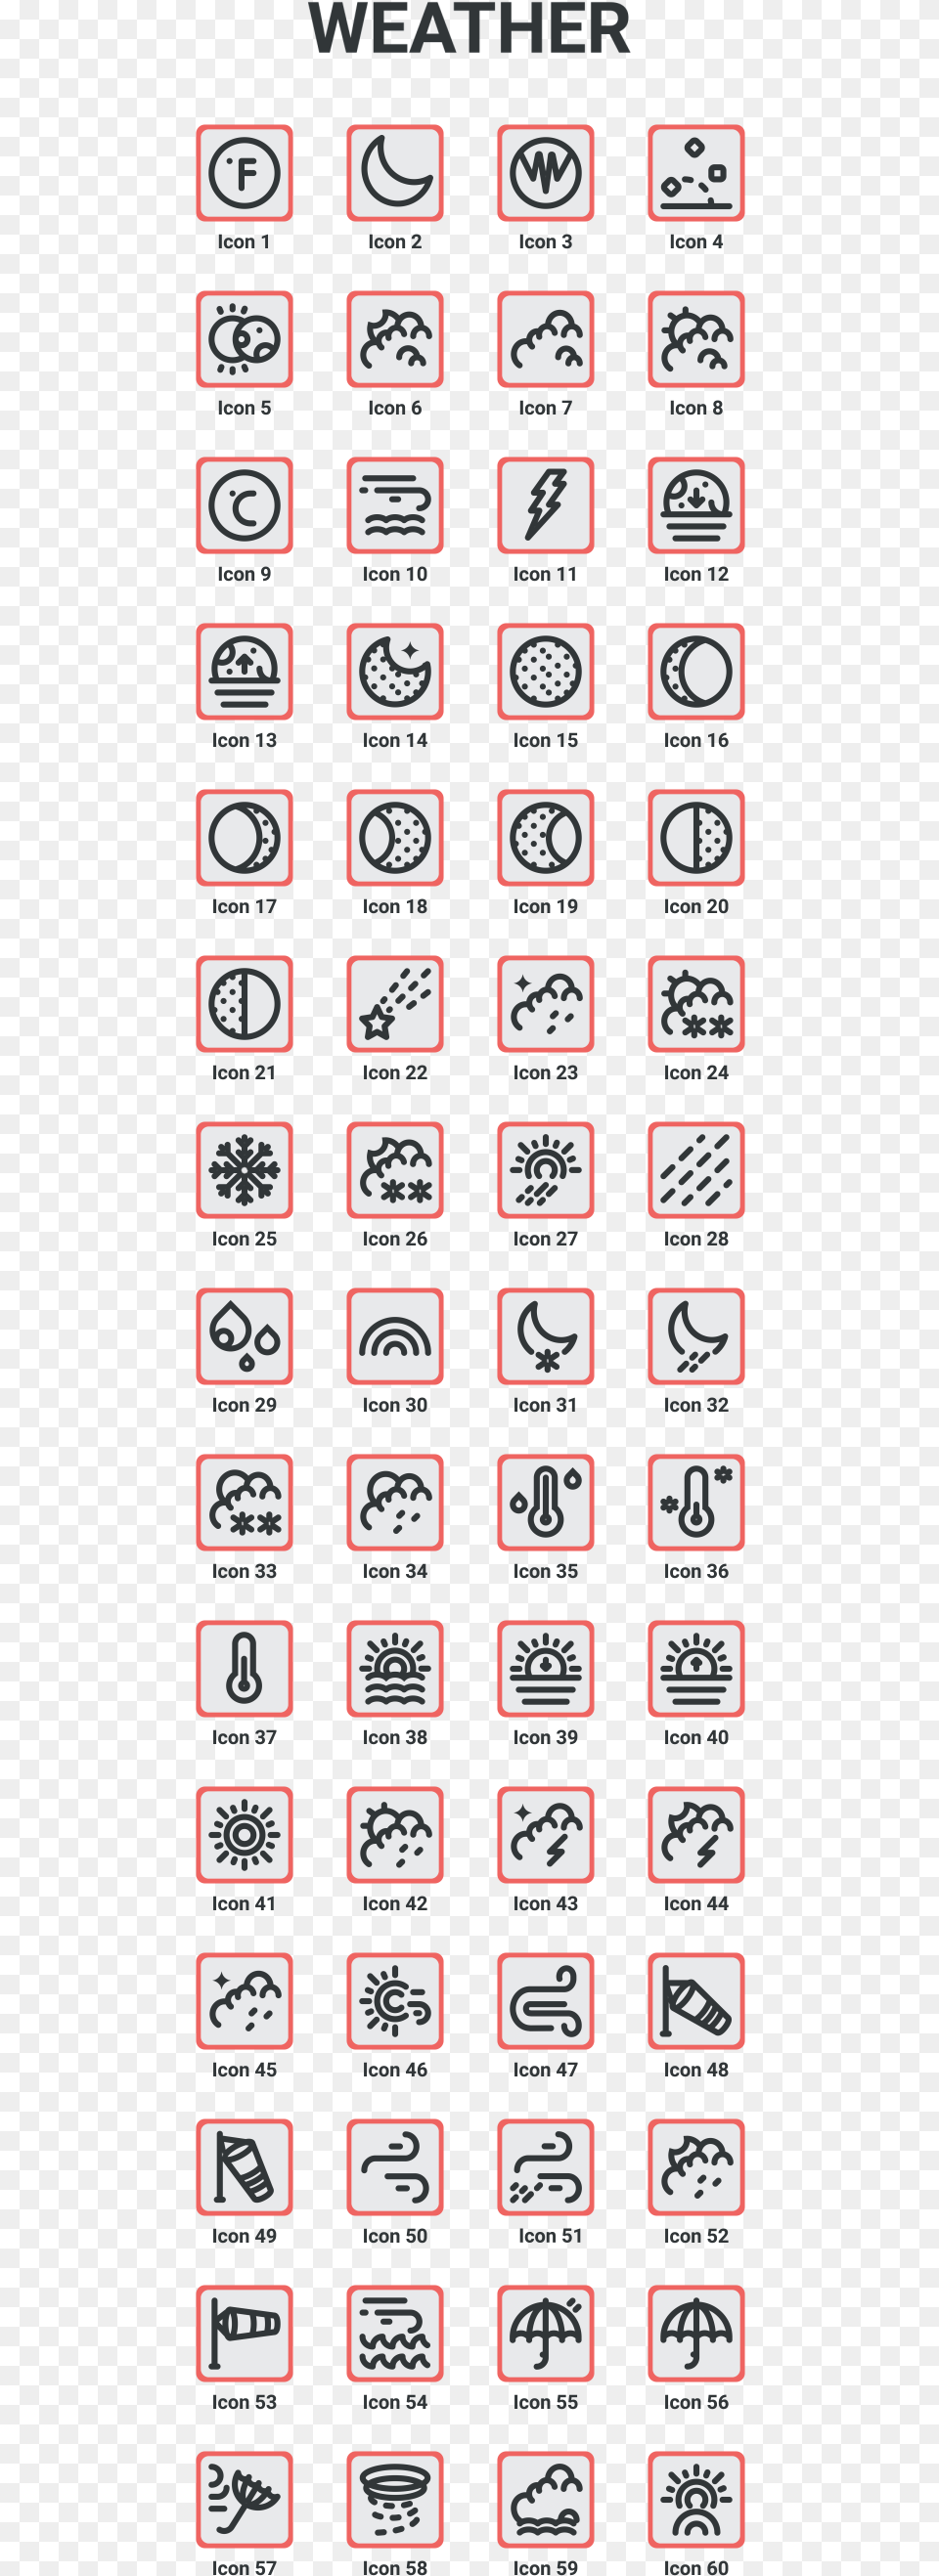 Weather Forecast Icons And Elements For Broadcast After Parallel, Sticker, Text, Symbol, Sign Free Png